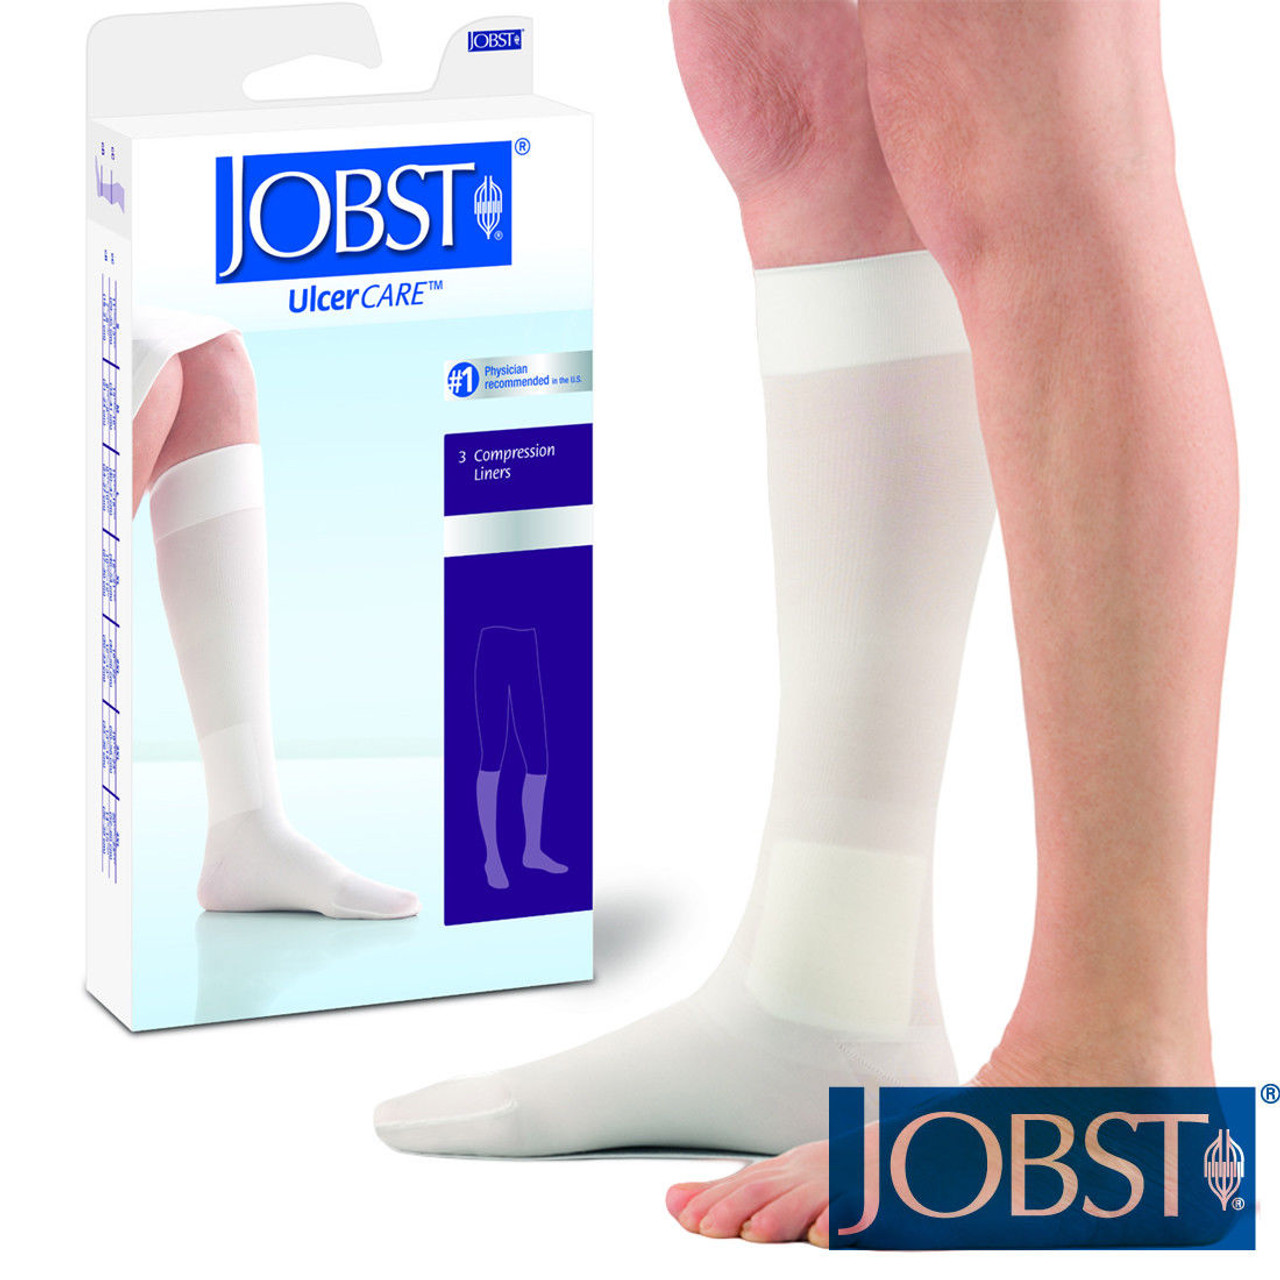 BSN-7363221 BX/3 JOBST ULCERCARE REPLACEMENT LINERS FOR READY-TO-WEAR COMPRESSION SM, WHITE